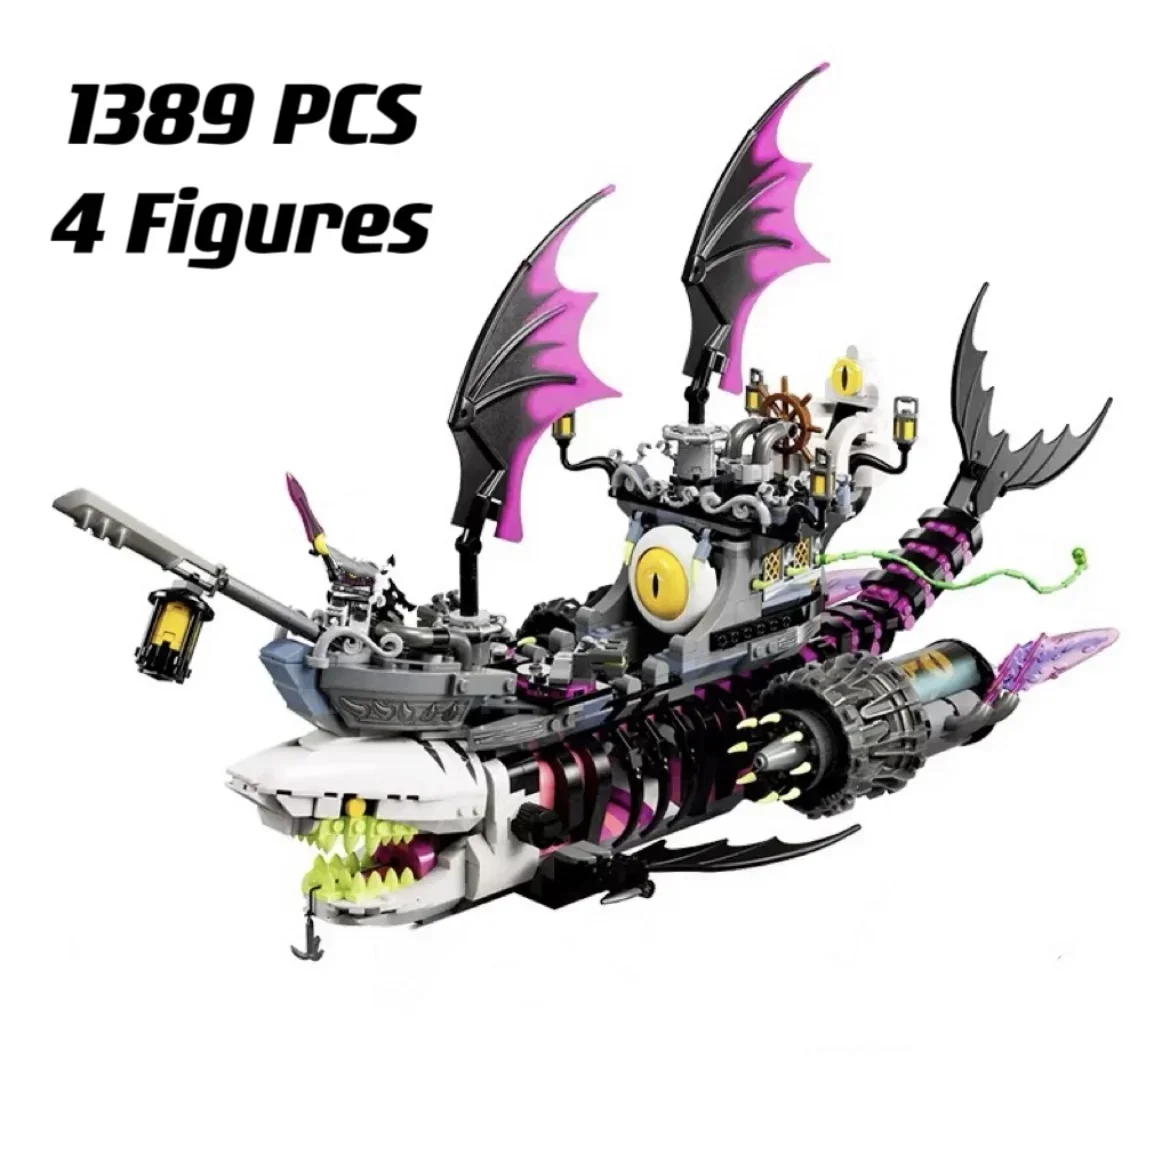 

2023 NEW 71469 DREAM Nightmare Shark Ship Building Blocks Toy Set Ship Monster Vehicle Toy for Creative Play Gift for Kids